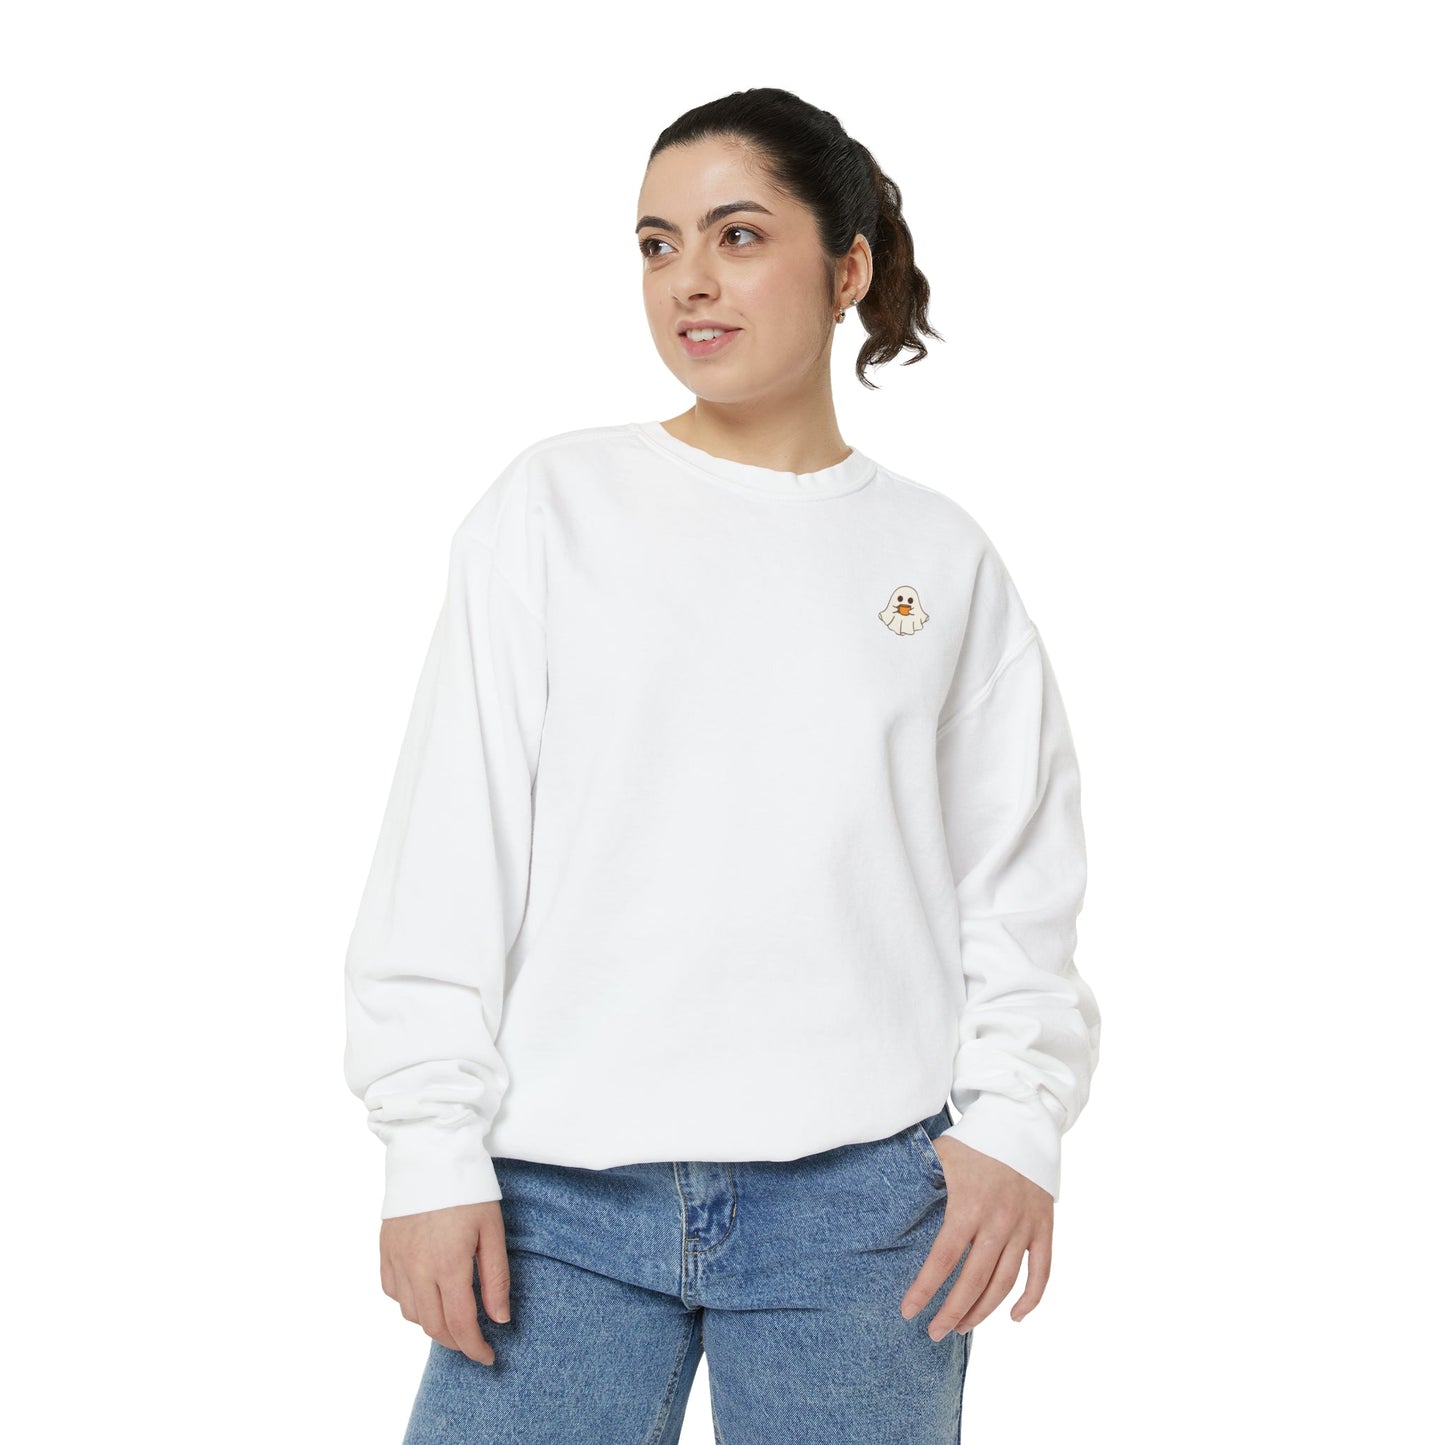 Get trendy with Ghost drinking coffee Sweatshirt - Sweatshirt available at Good Gift Company. Grab yours for $38.95 today!